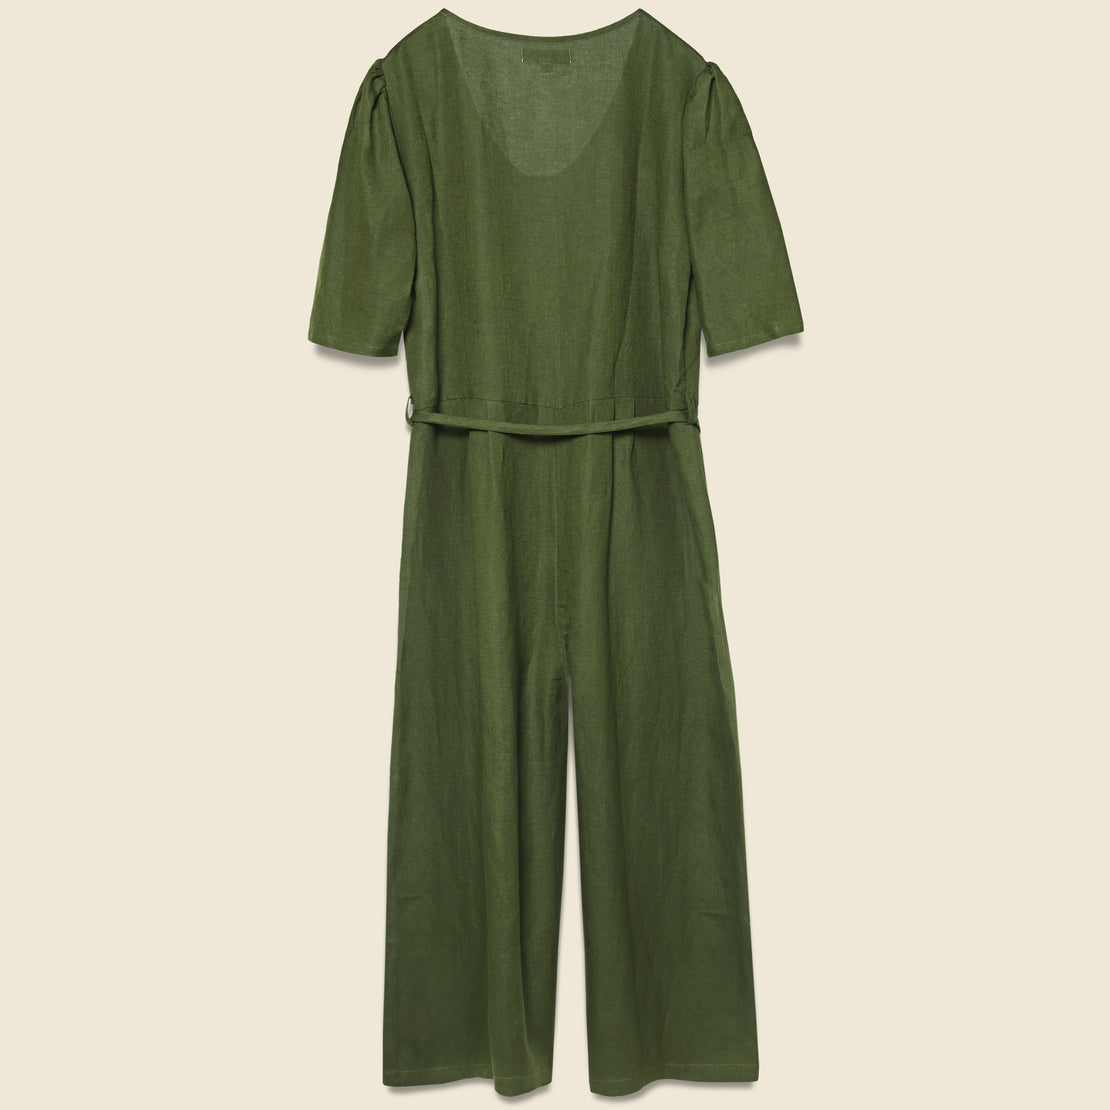 Jude Pantsuit - Moss - First Rite - STAG Provisions - W - Onepiece - Jumpsuit